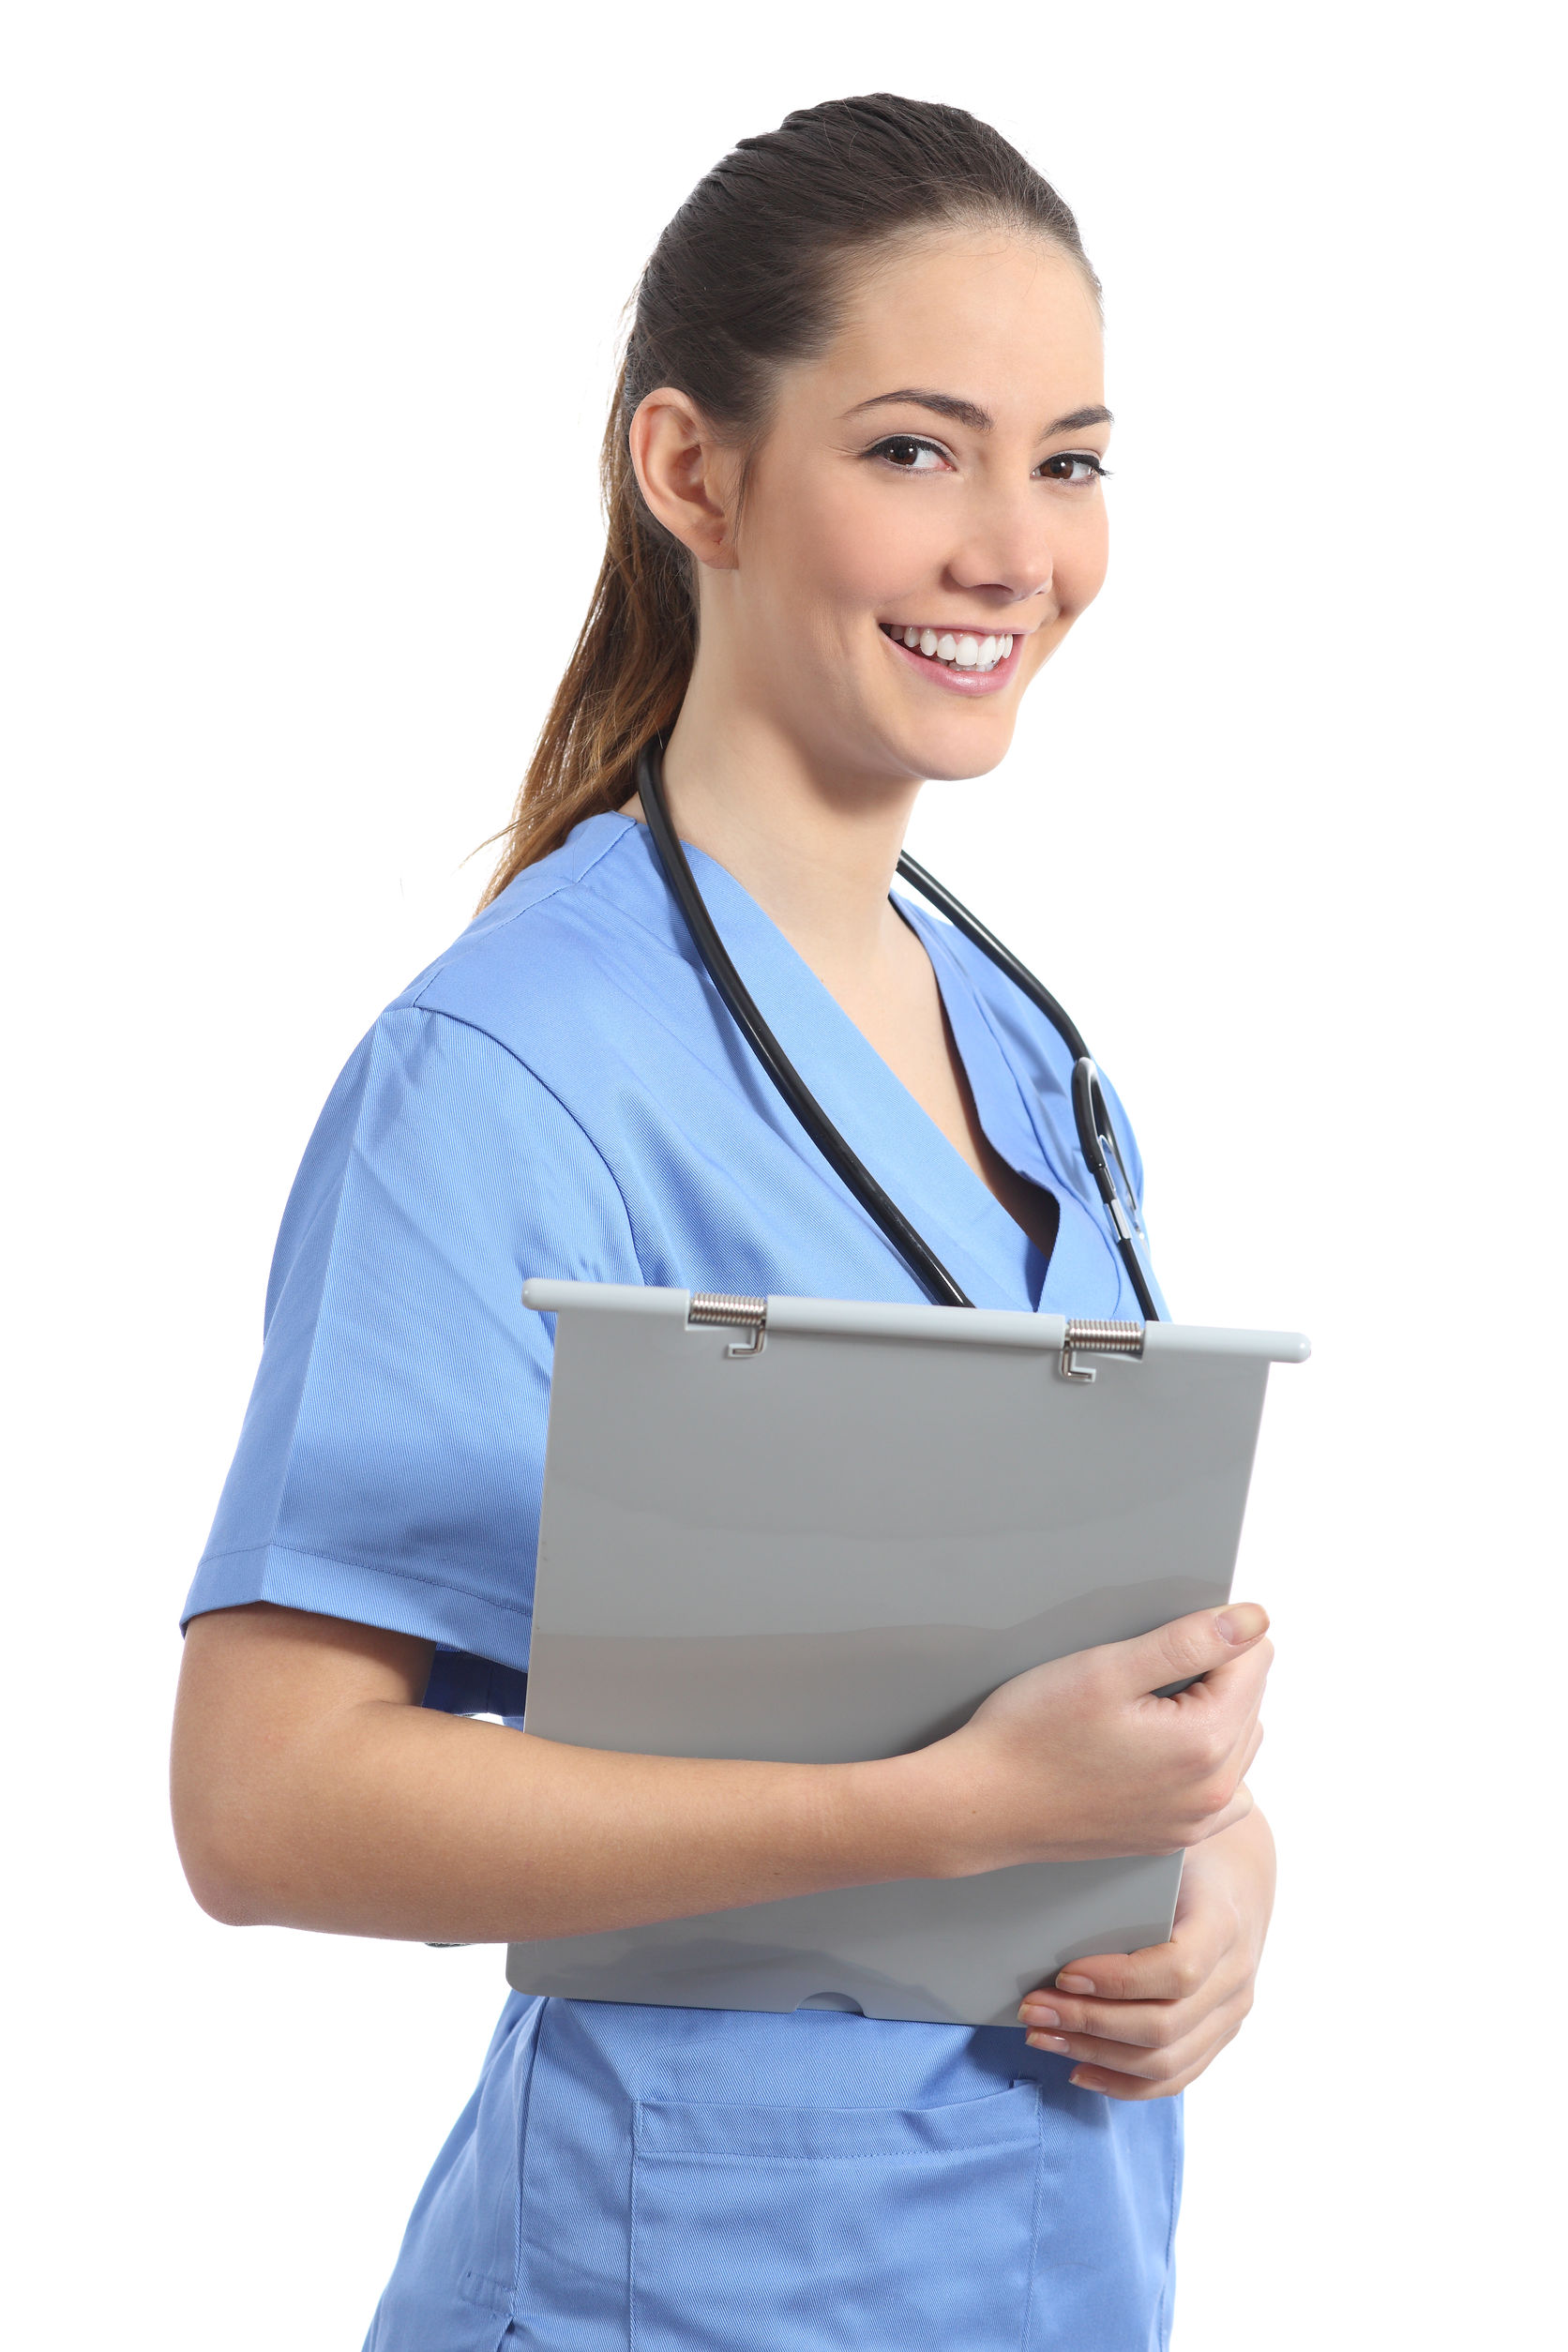 The 10 Main Responsibilities Of A Certified Nursing Assistant Cna